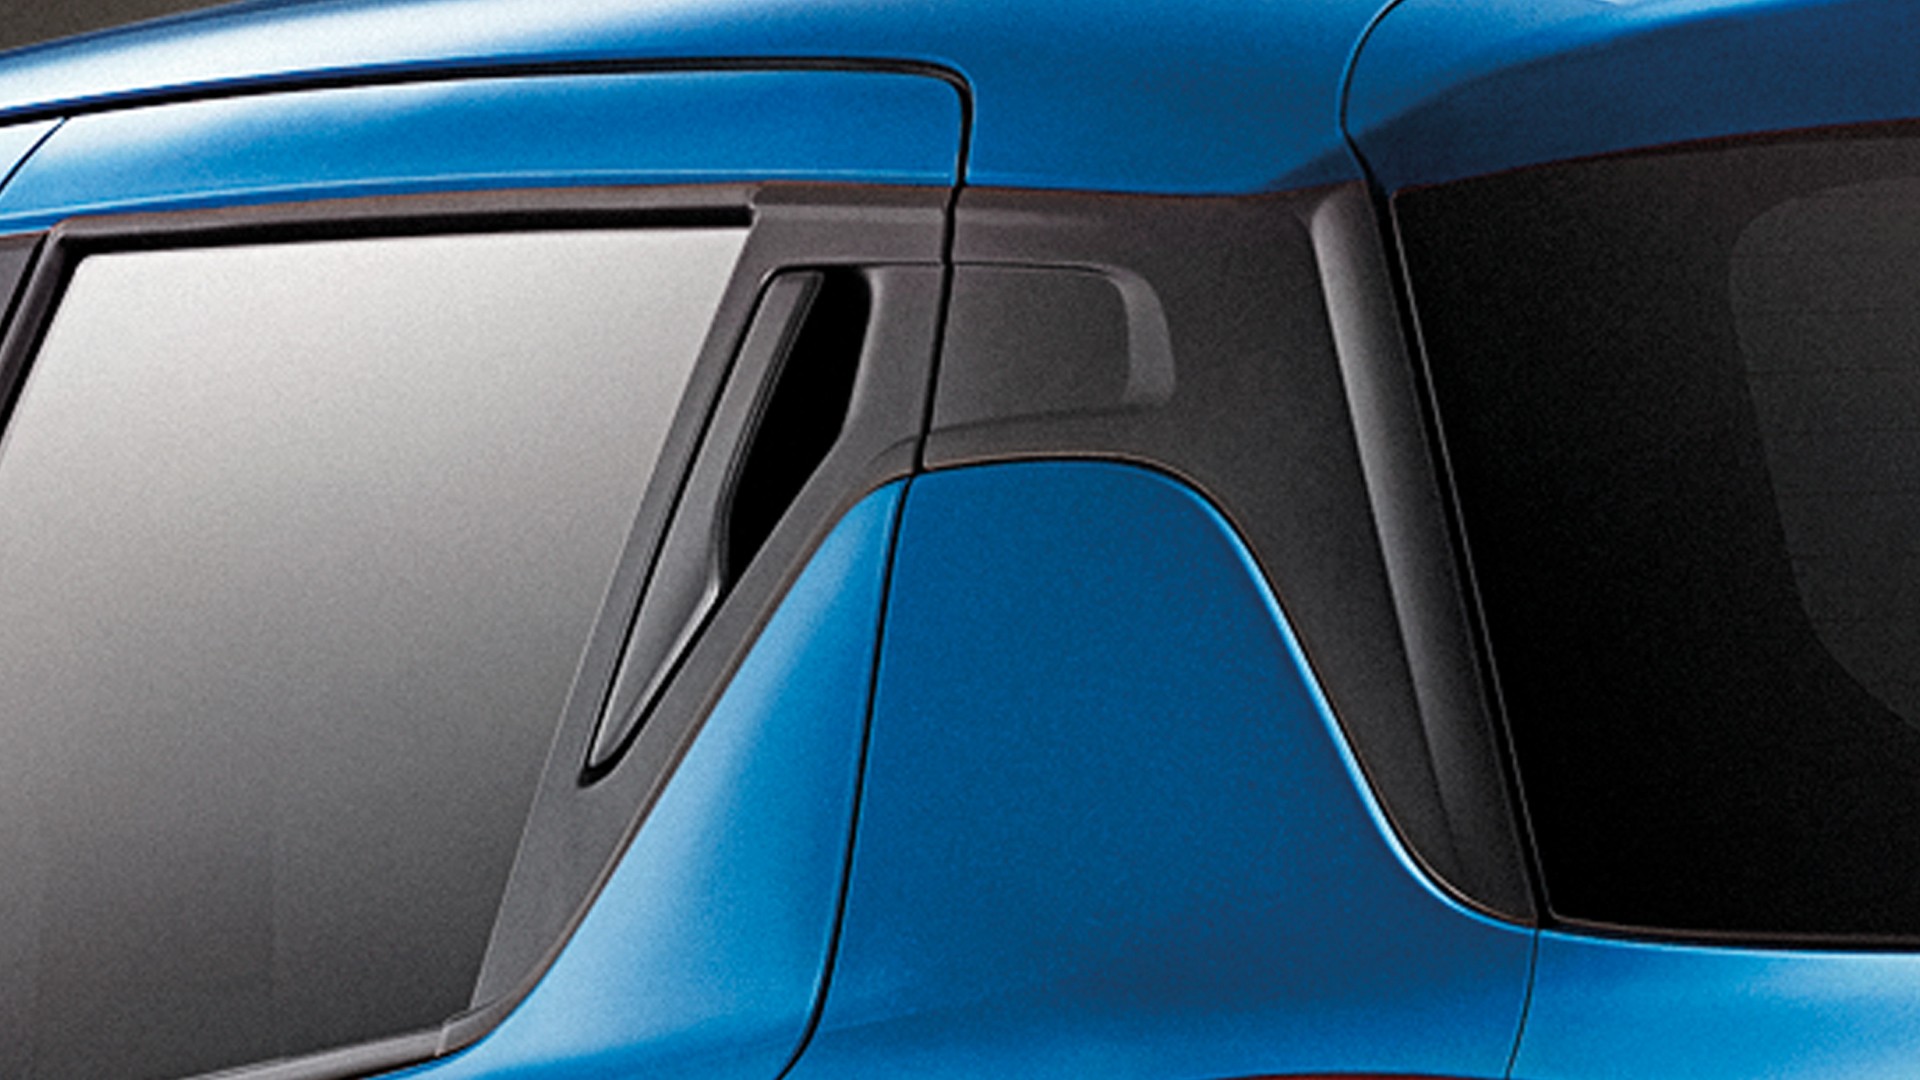 New Suzuki Swift Rear-Door Handles Designed To Be Smooth Along with The Car Body.